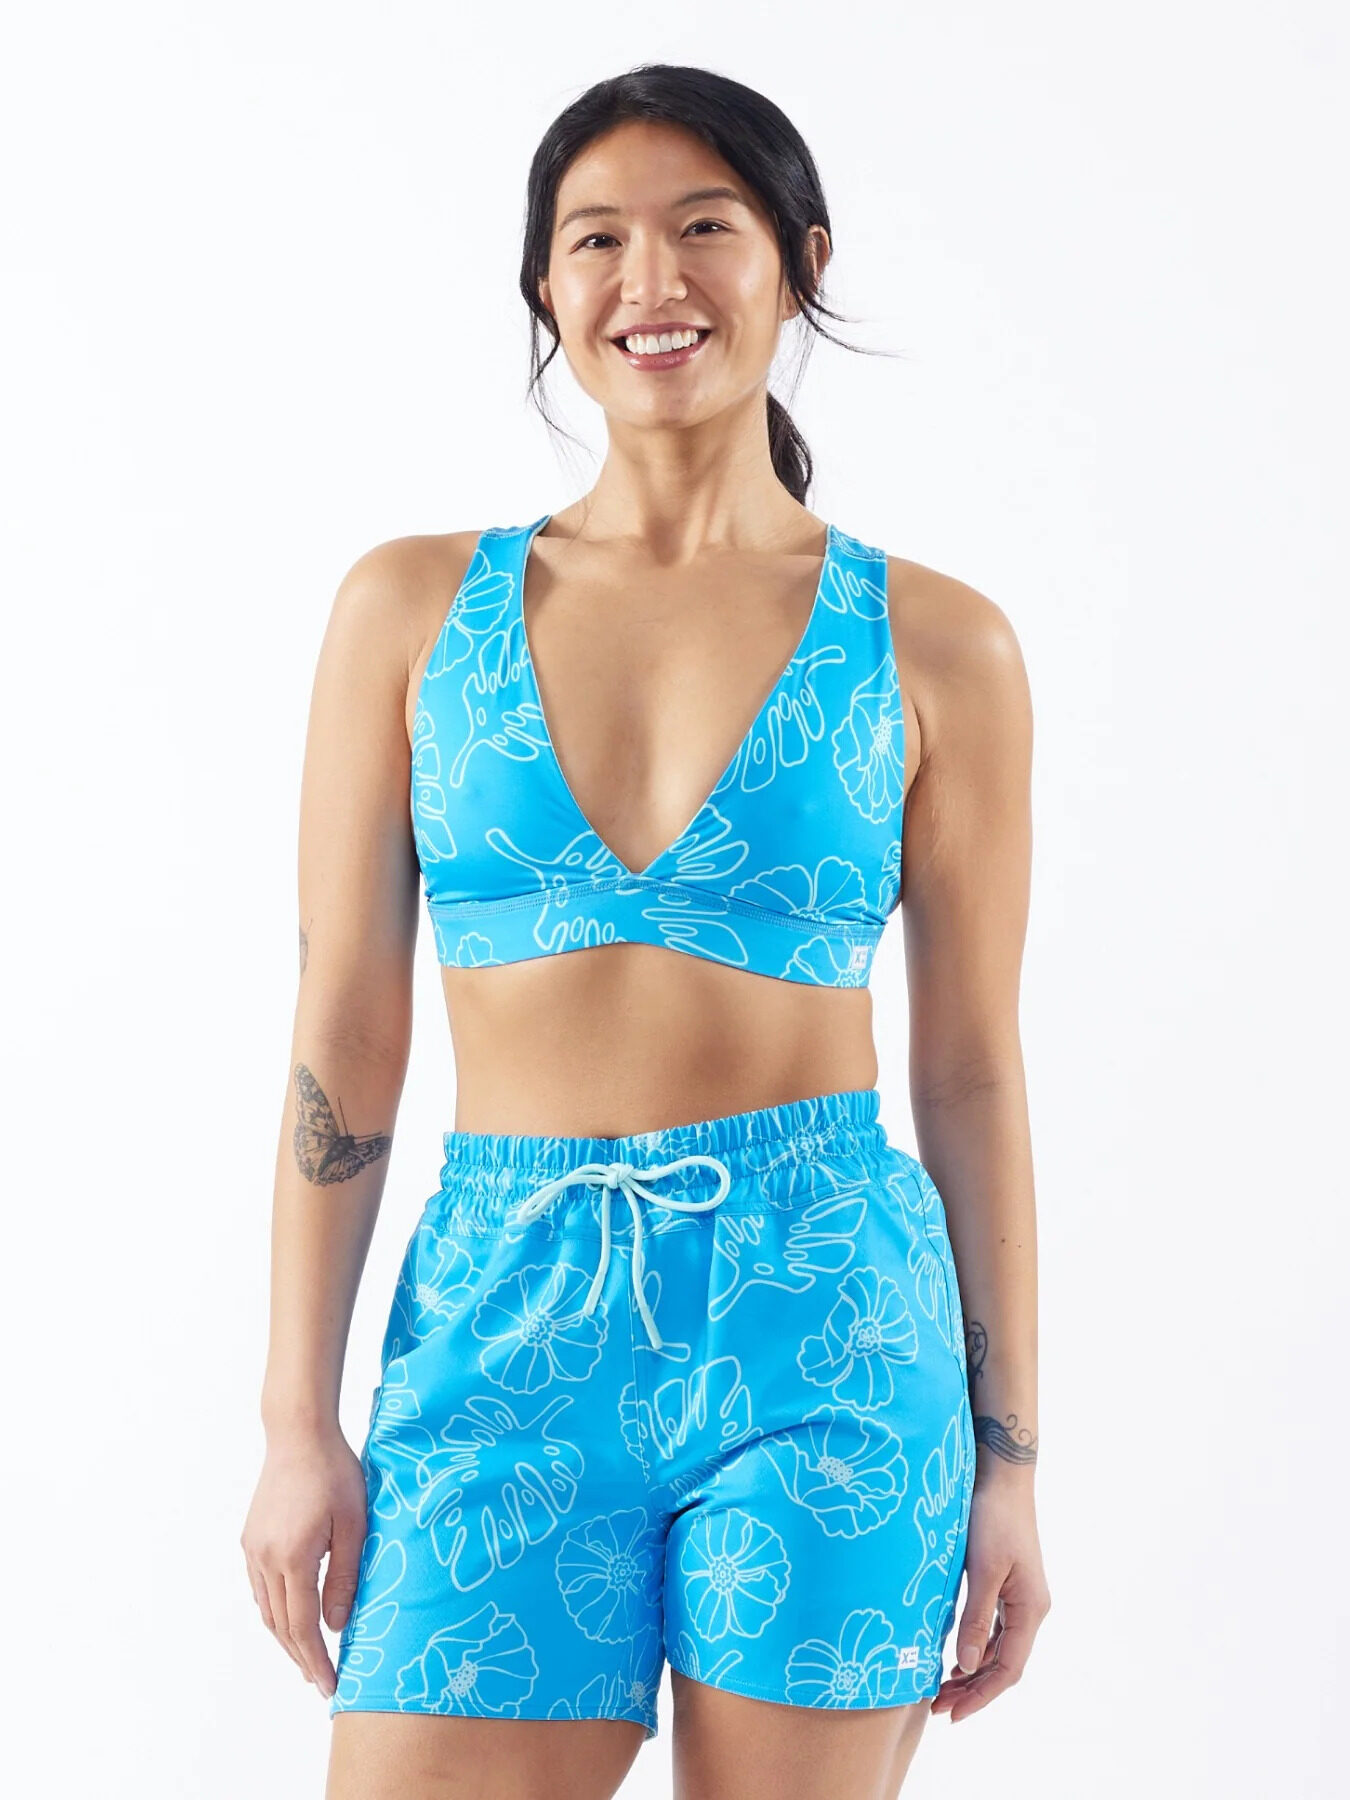 Woman in blue floral swimwear smiling against a white background.